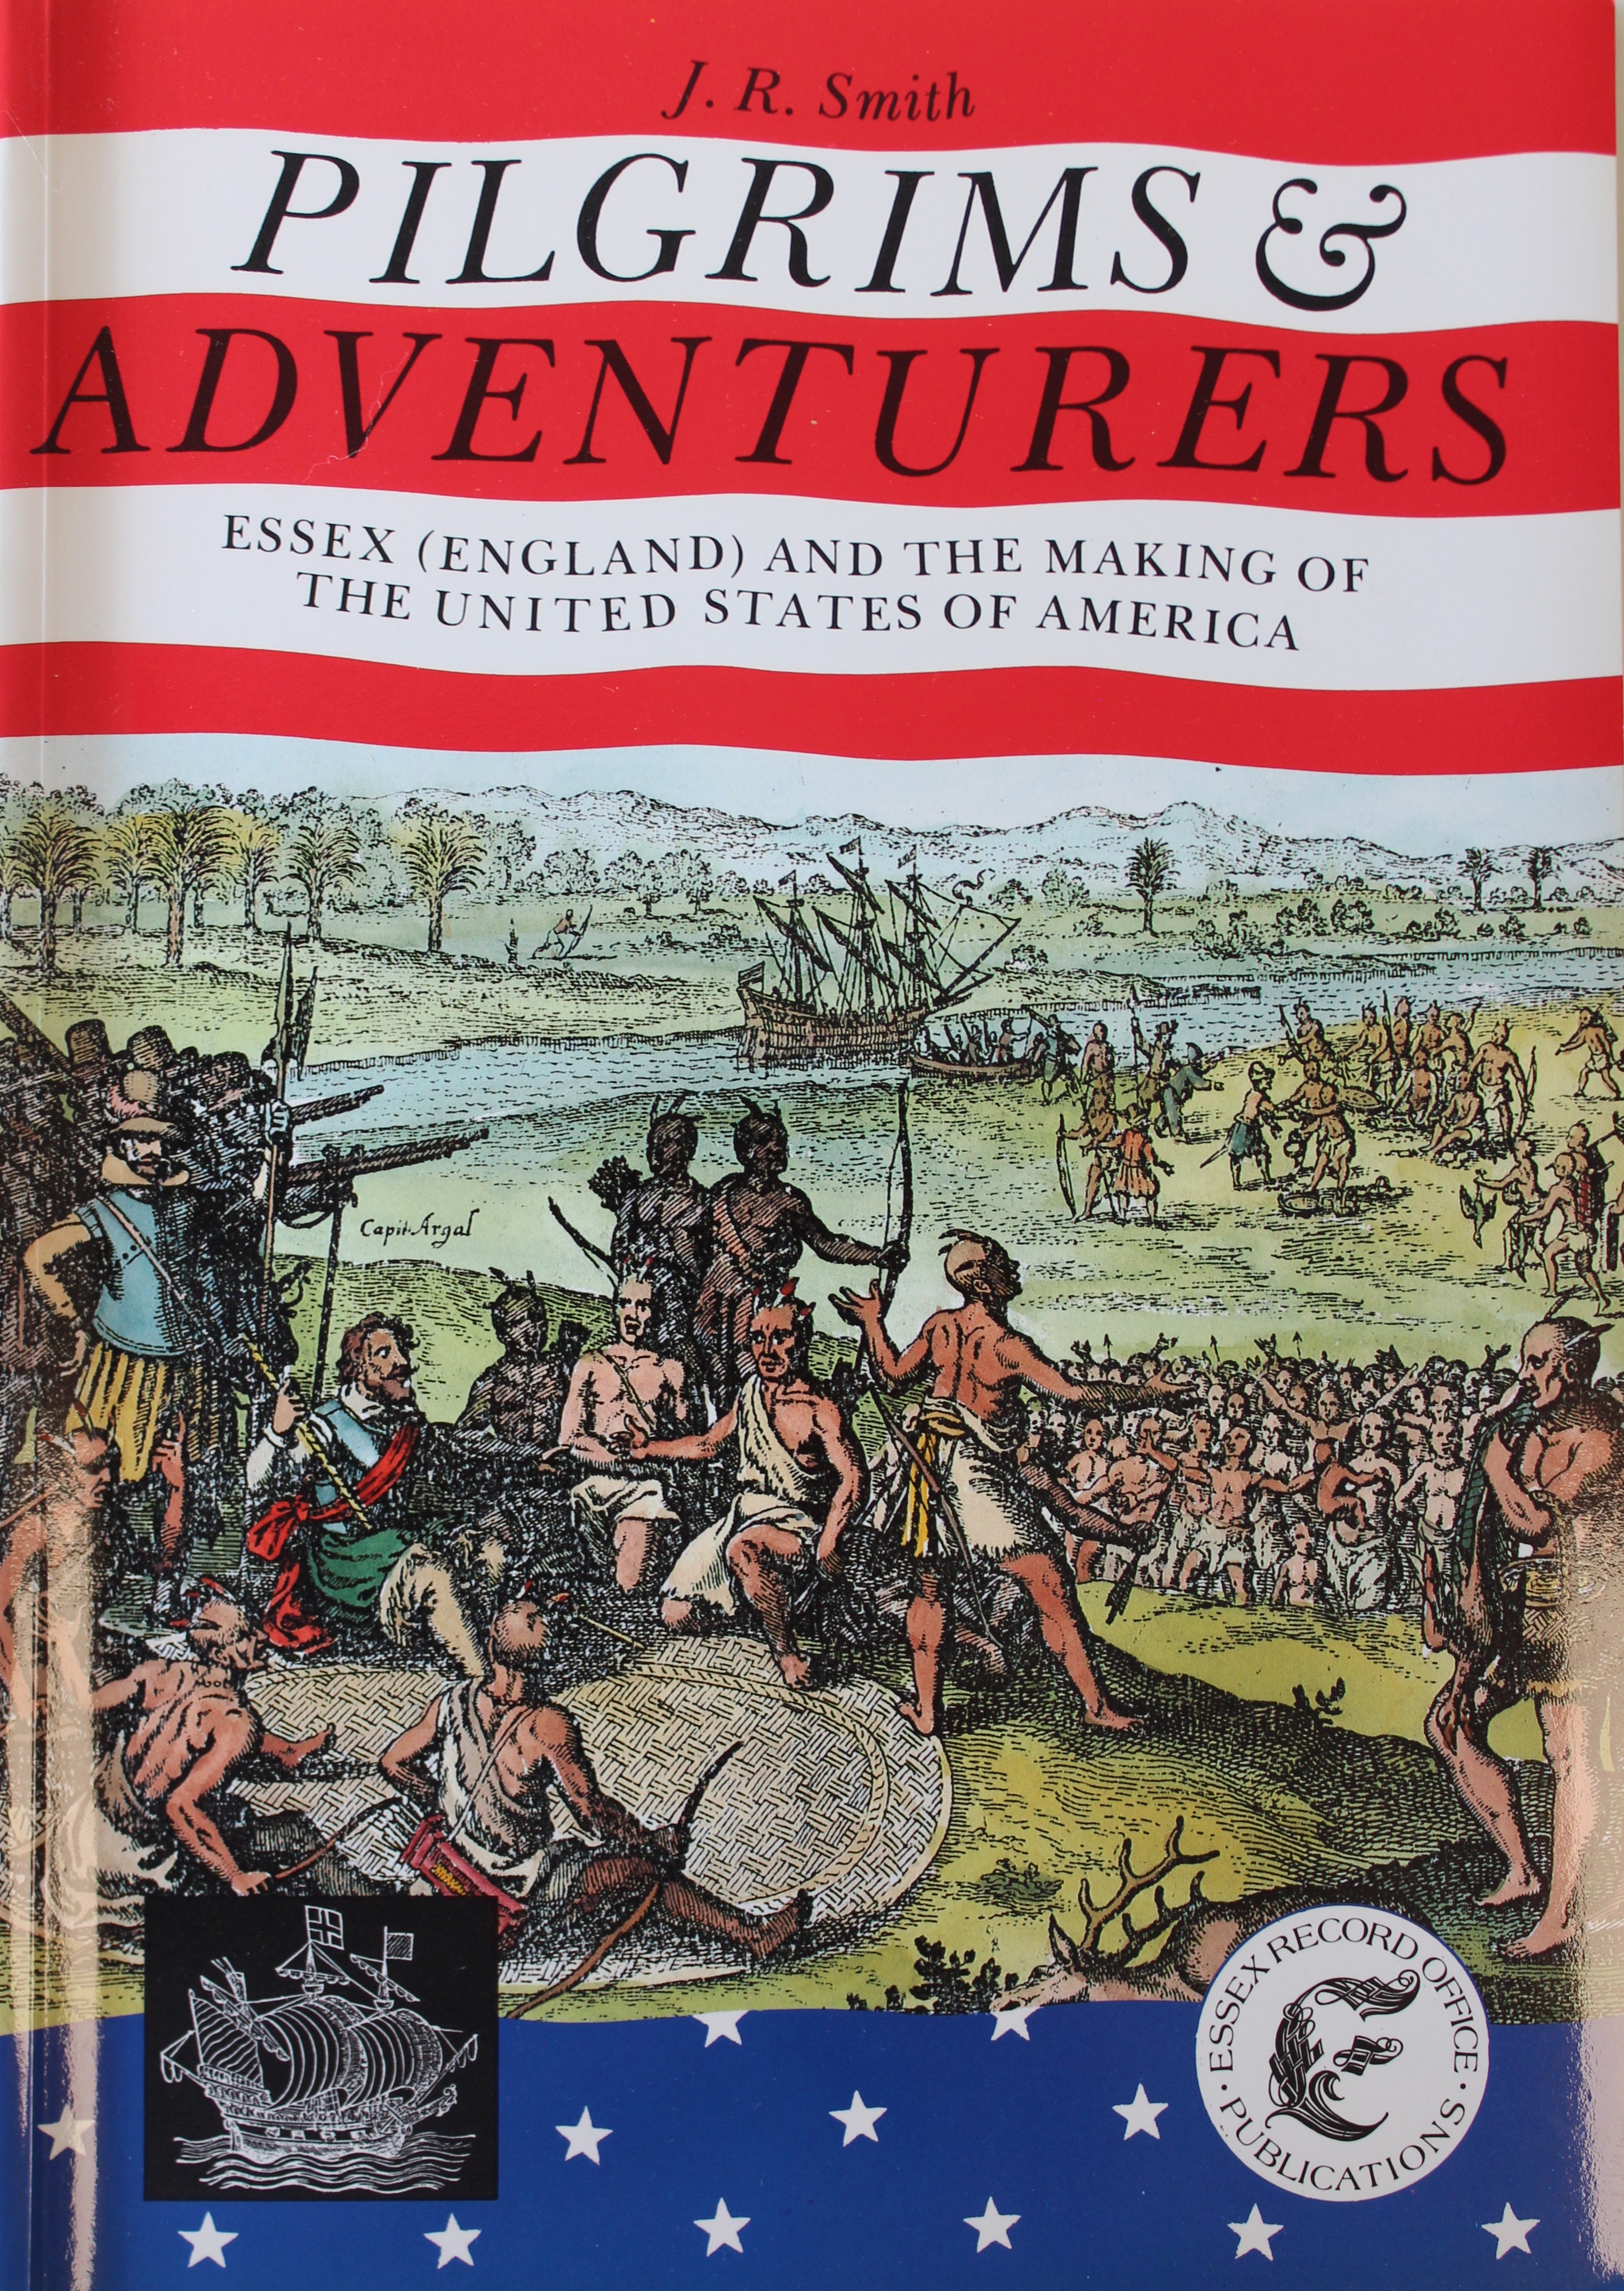 Front cover "Pilgrims and Adventurers"